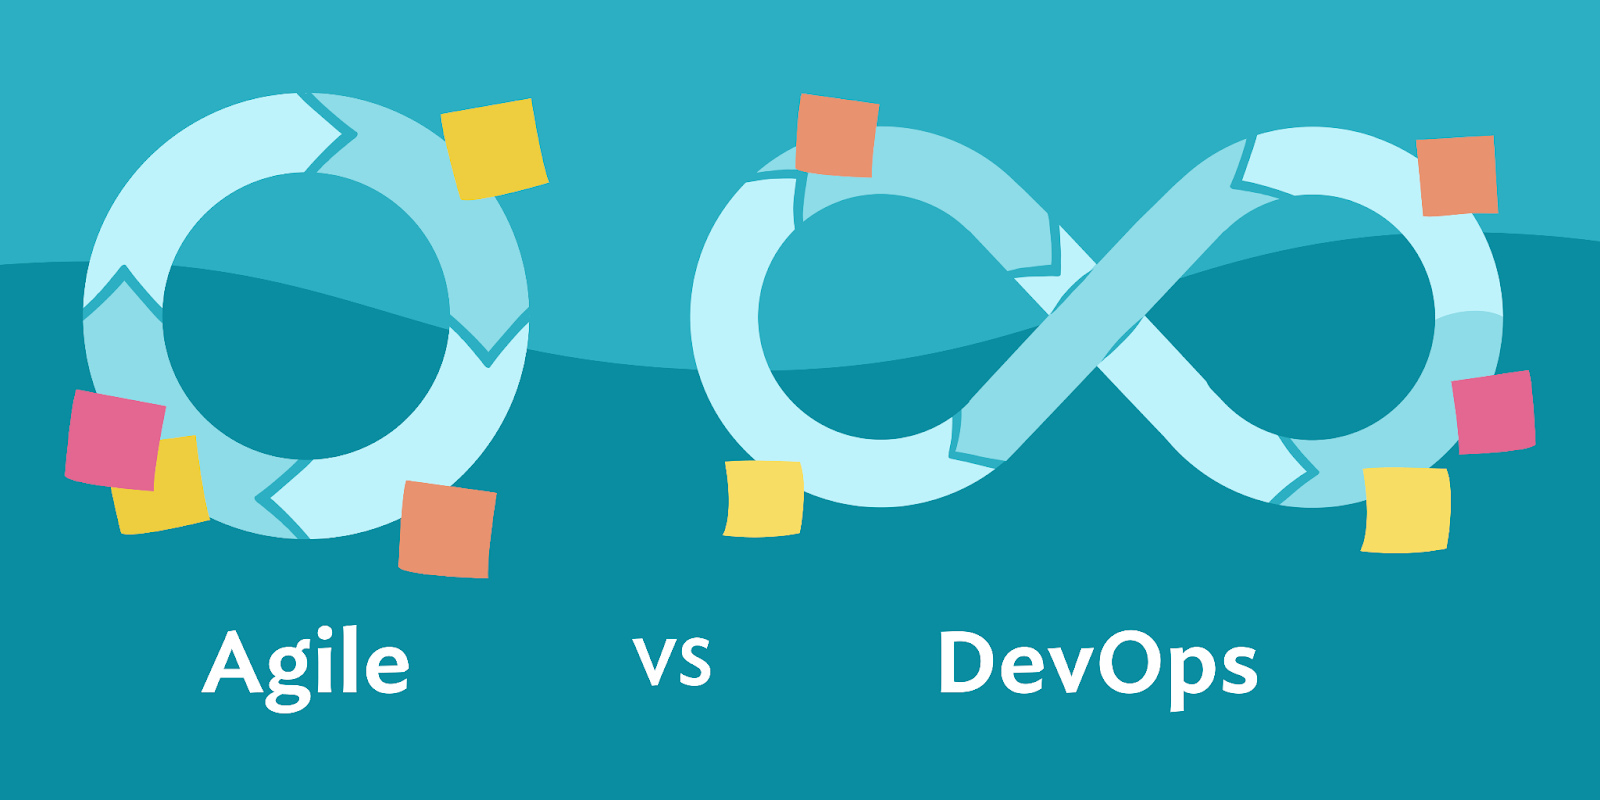 What Makes Agile and DevOps Different